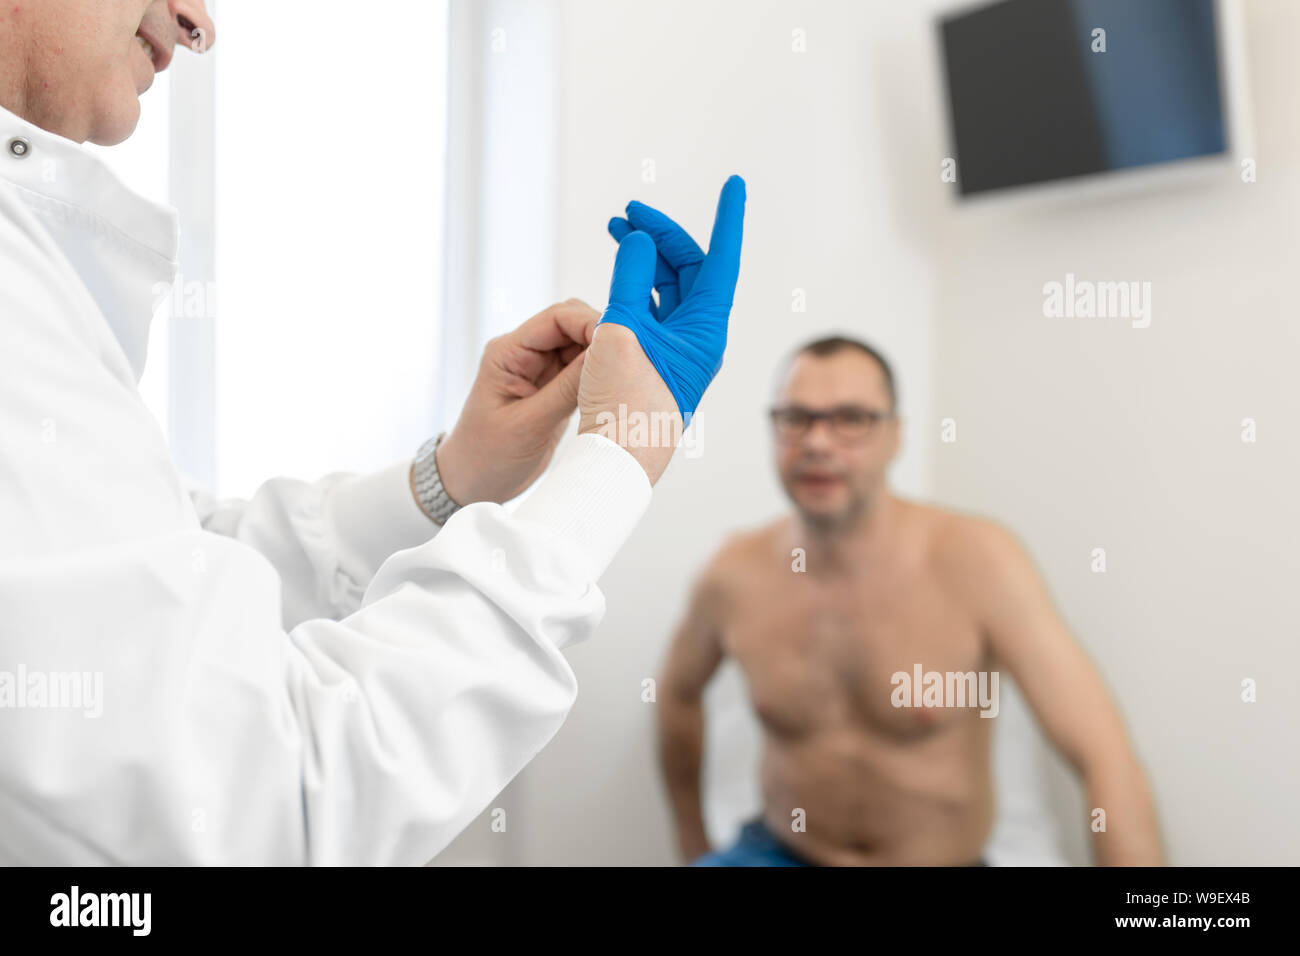 Doctor urologist puts a medical glove on the arm to examine the patient's prostate, prostate massage, lymphatic drainage. Stock Photo